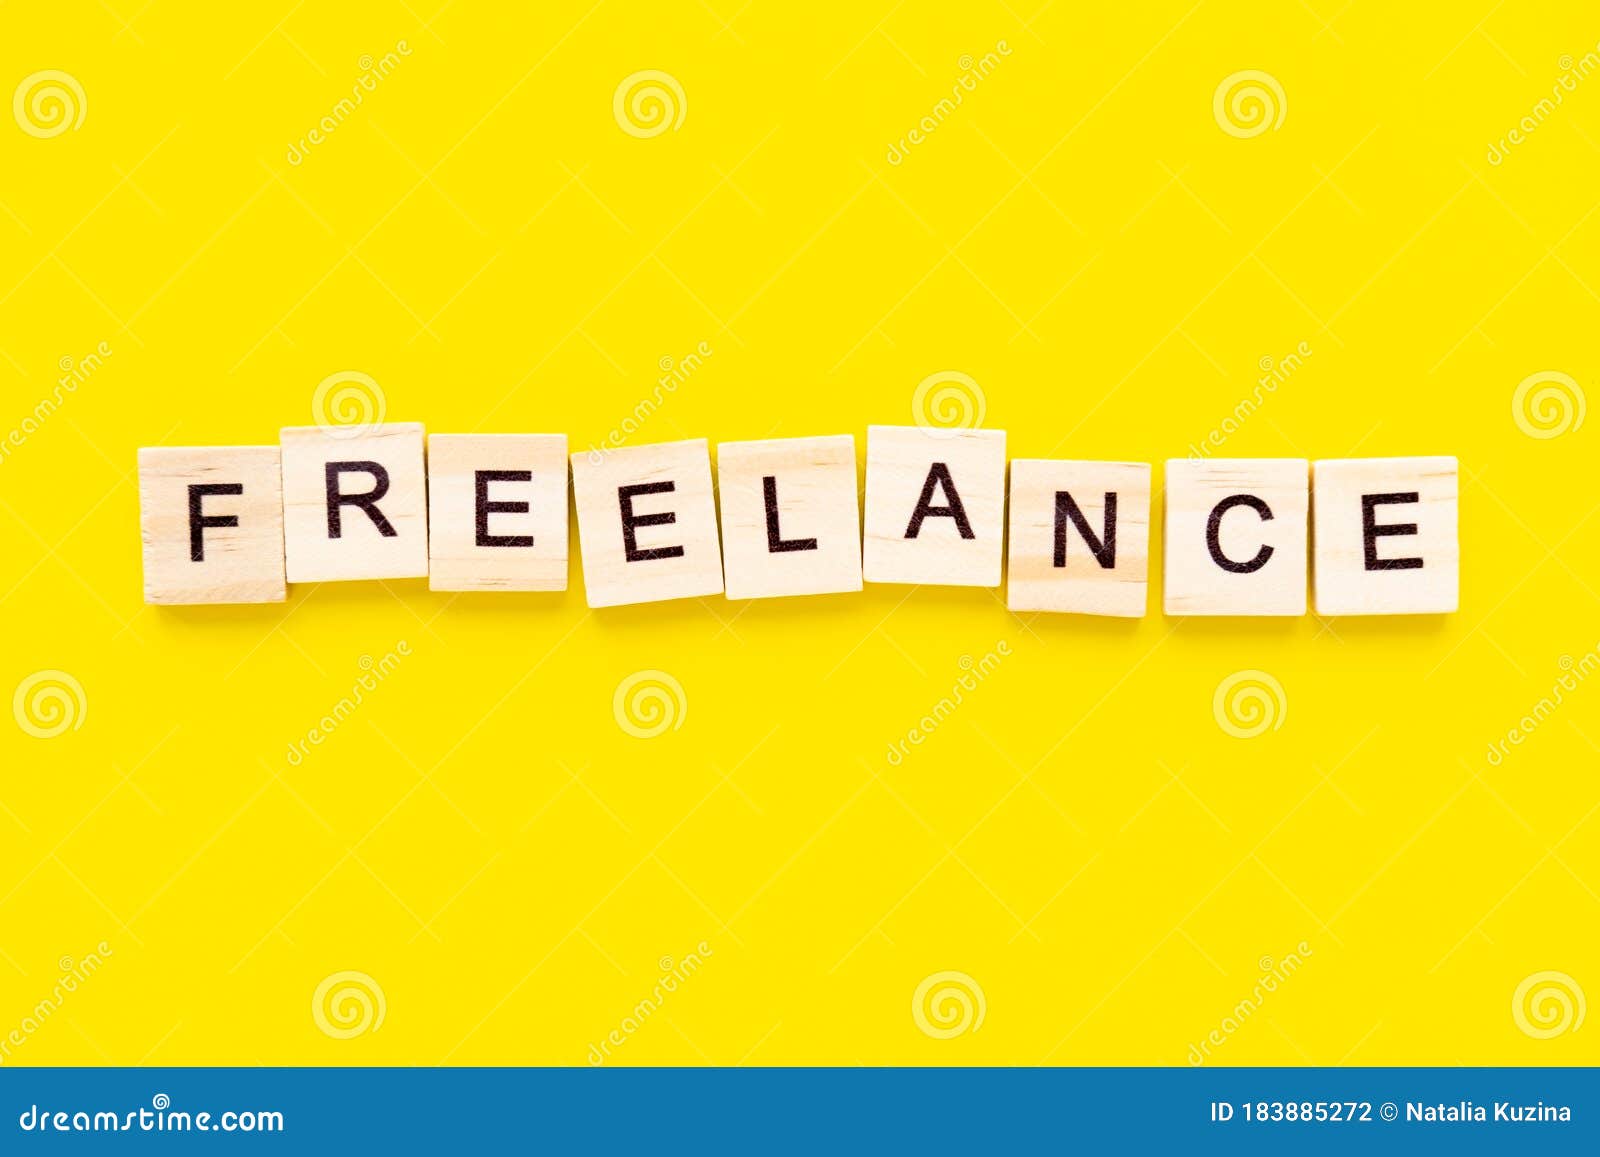 word freelance. wooden blocks with lettering on top of yellow background. human resource management and recruitment and